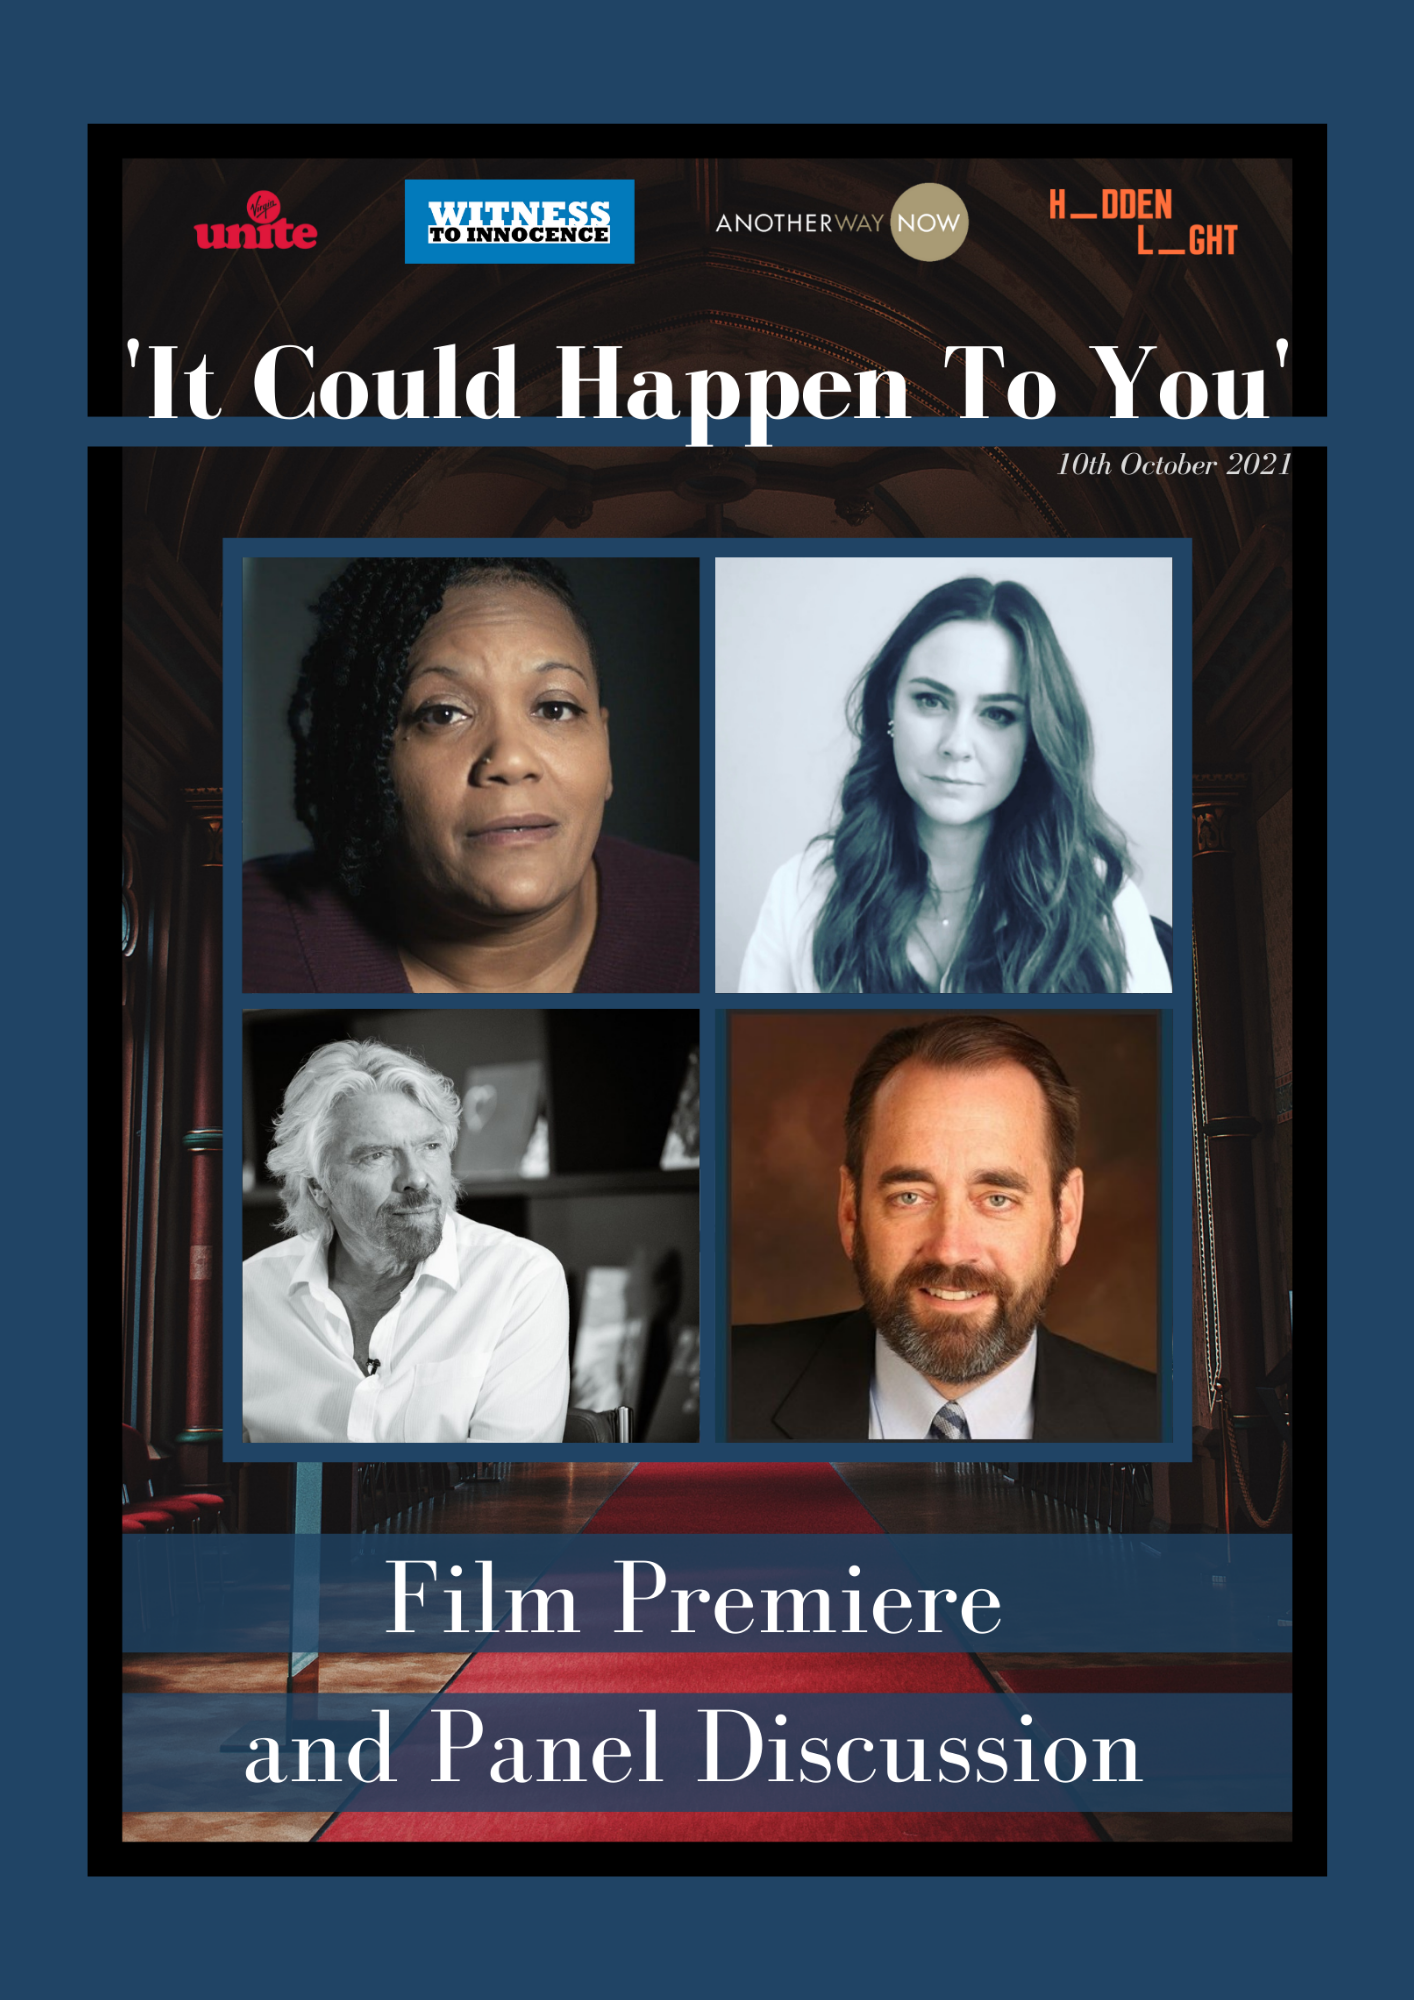 Death Penalty Film Premiere: It Could Happen To You